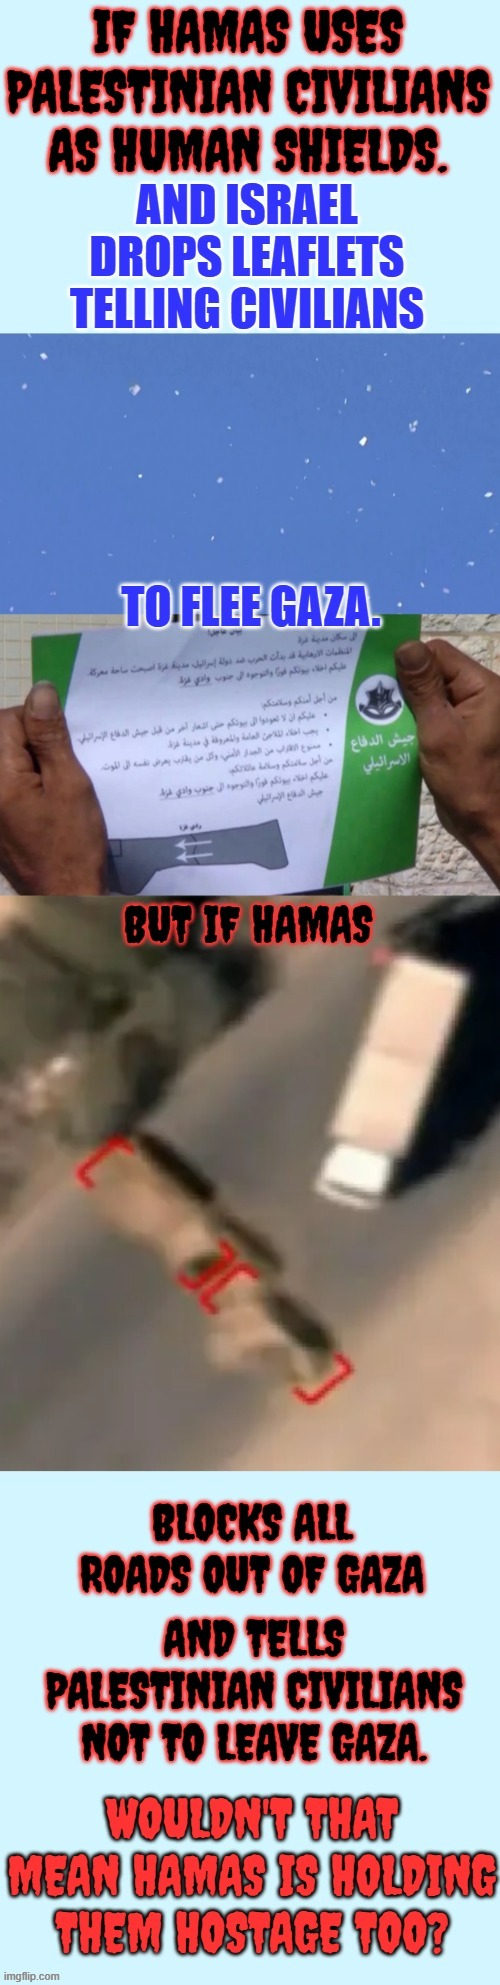 Looking At It A Different Way | image tagged in memes,israel,leave,hamas,hostage,holding | made w/ Imgflip meme maker